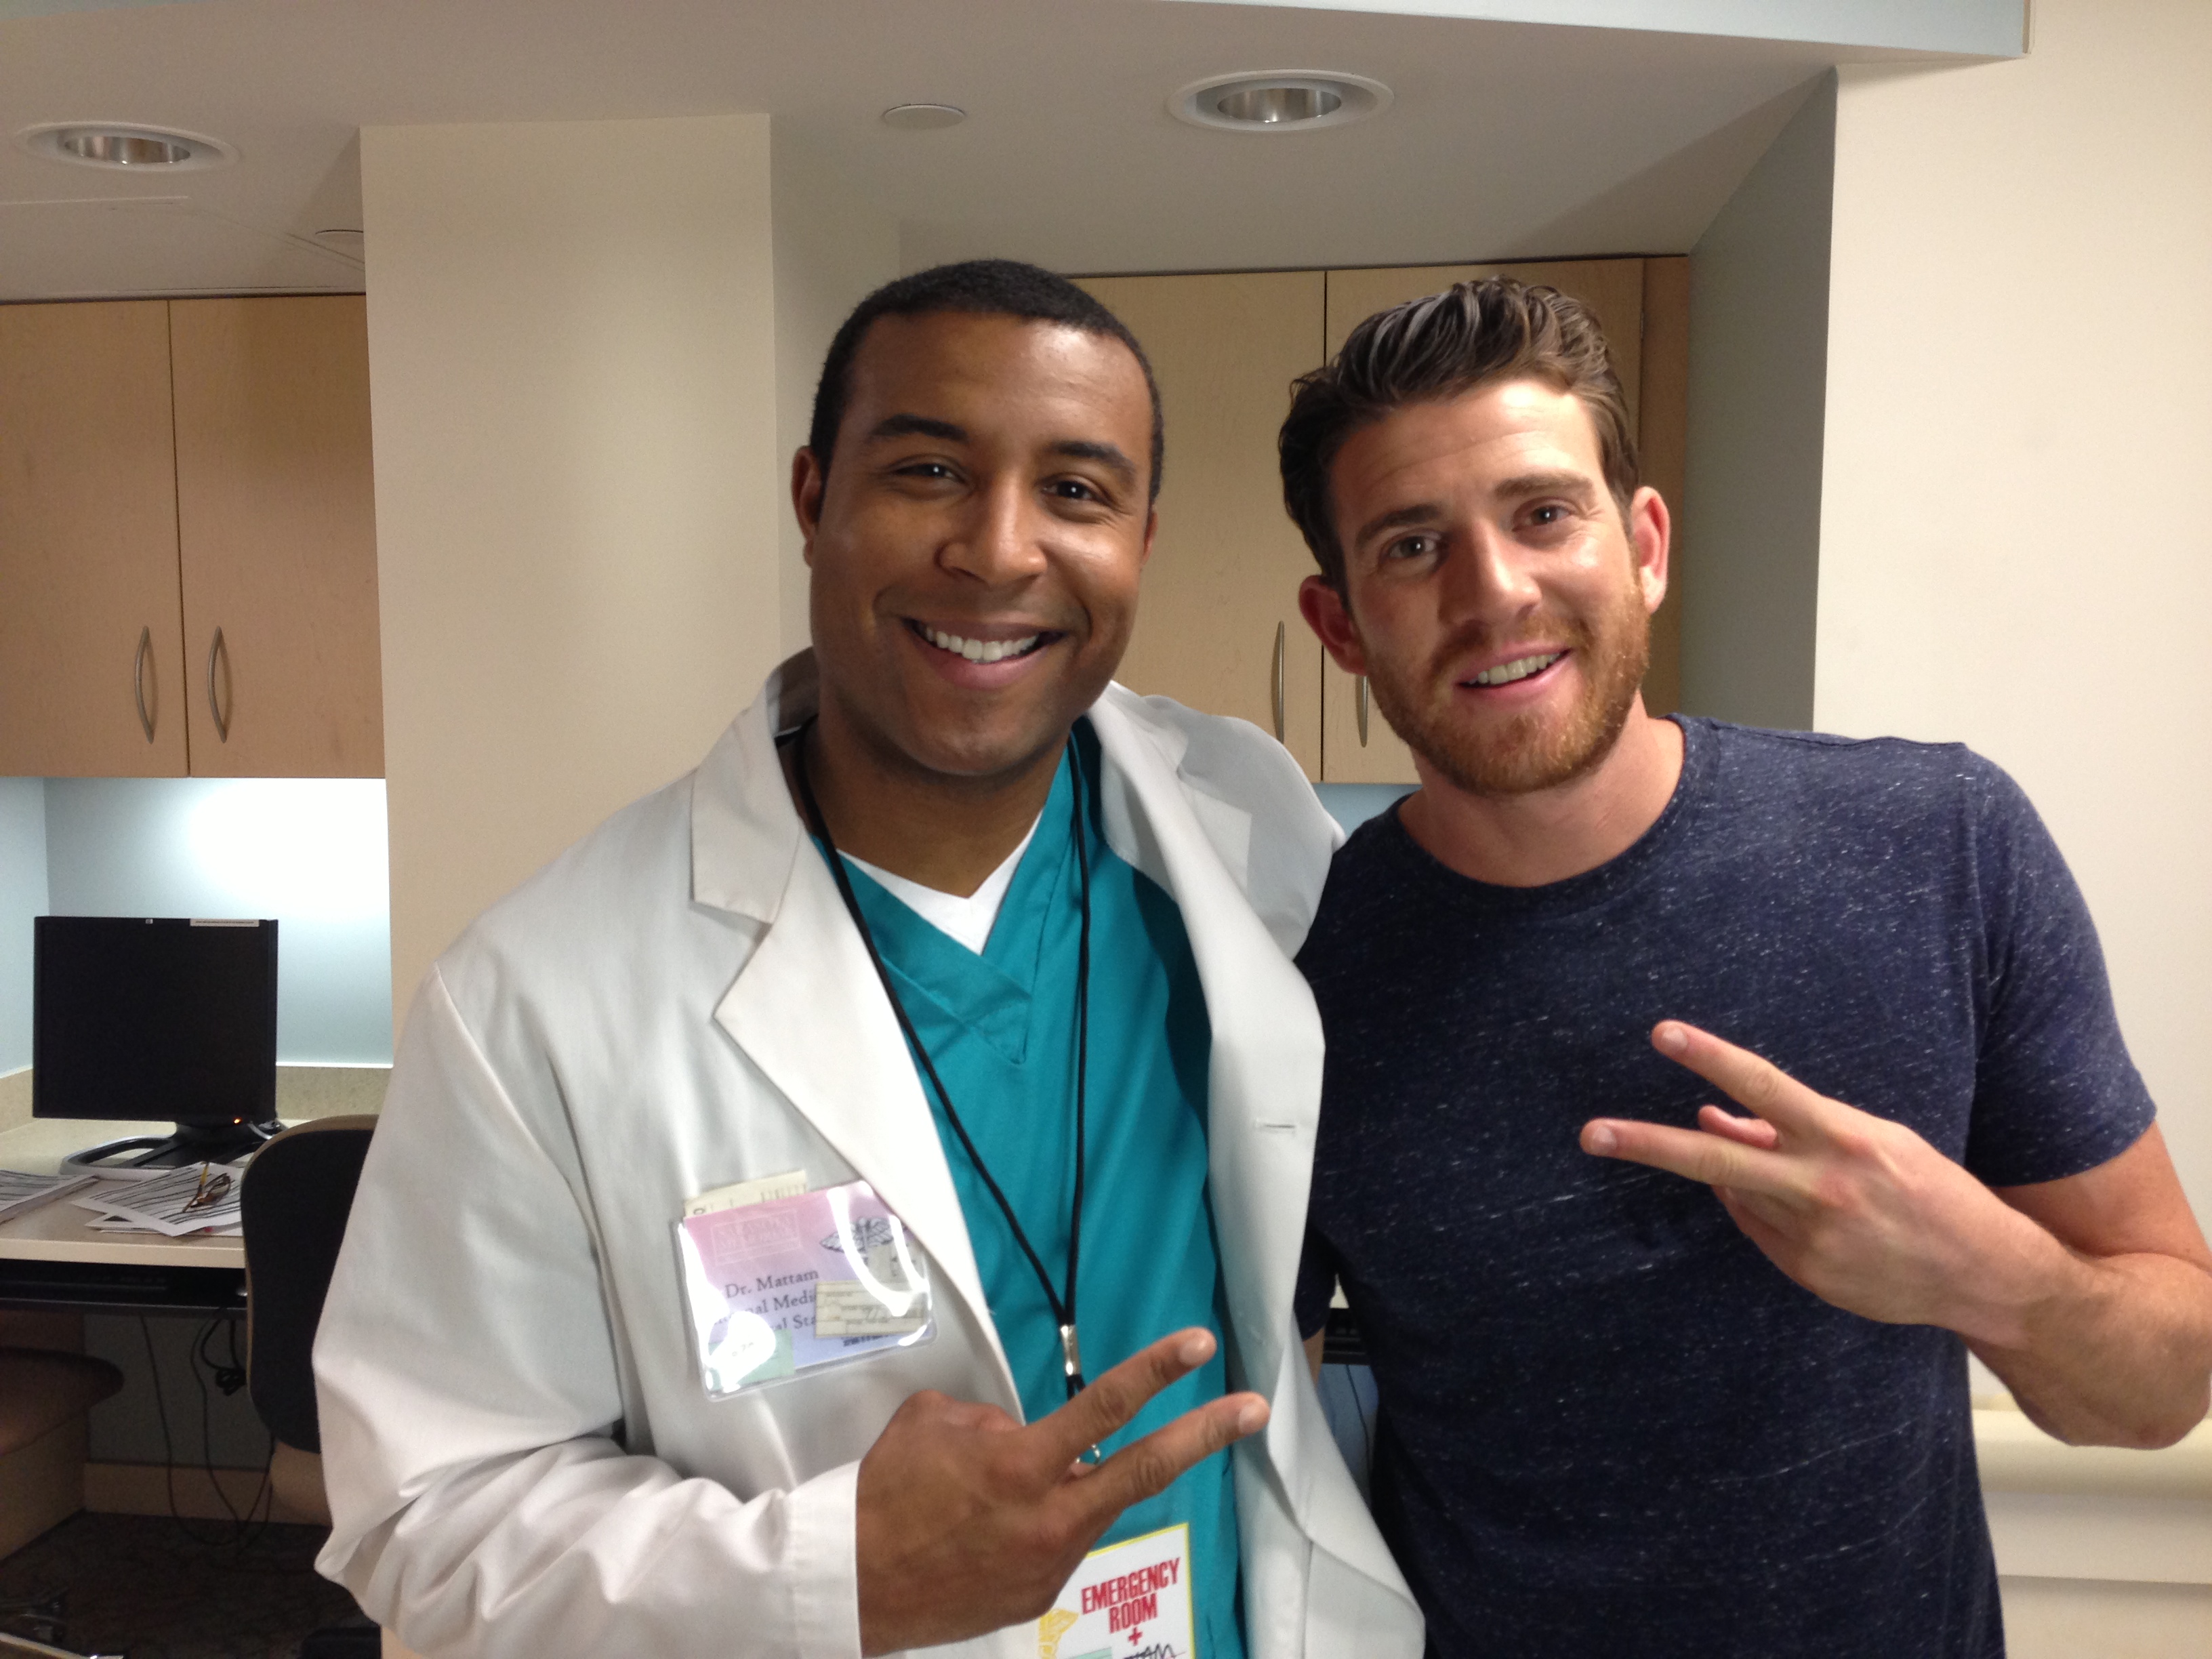 Bryan Greenberg and Henry Bazemore Jr. on Location - A Short History of Decay